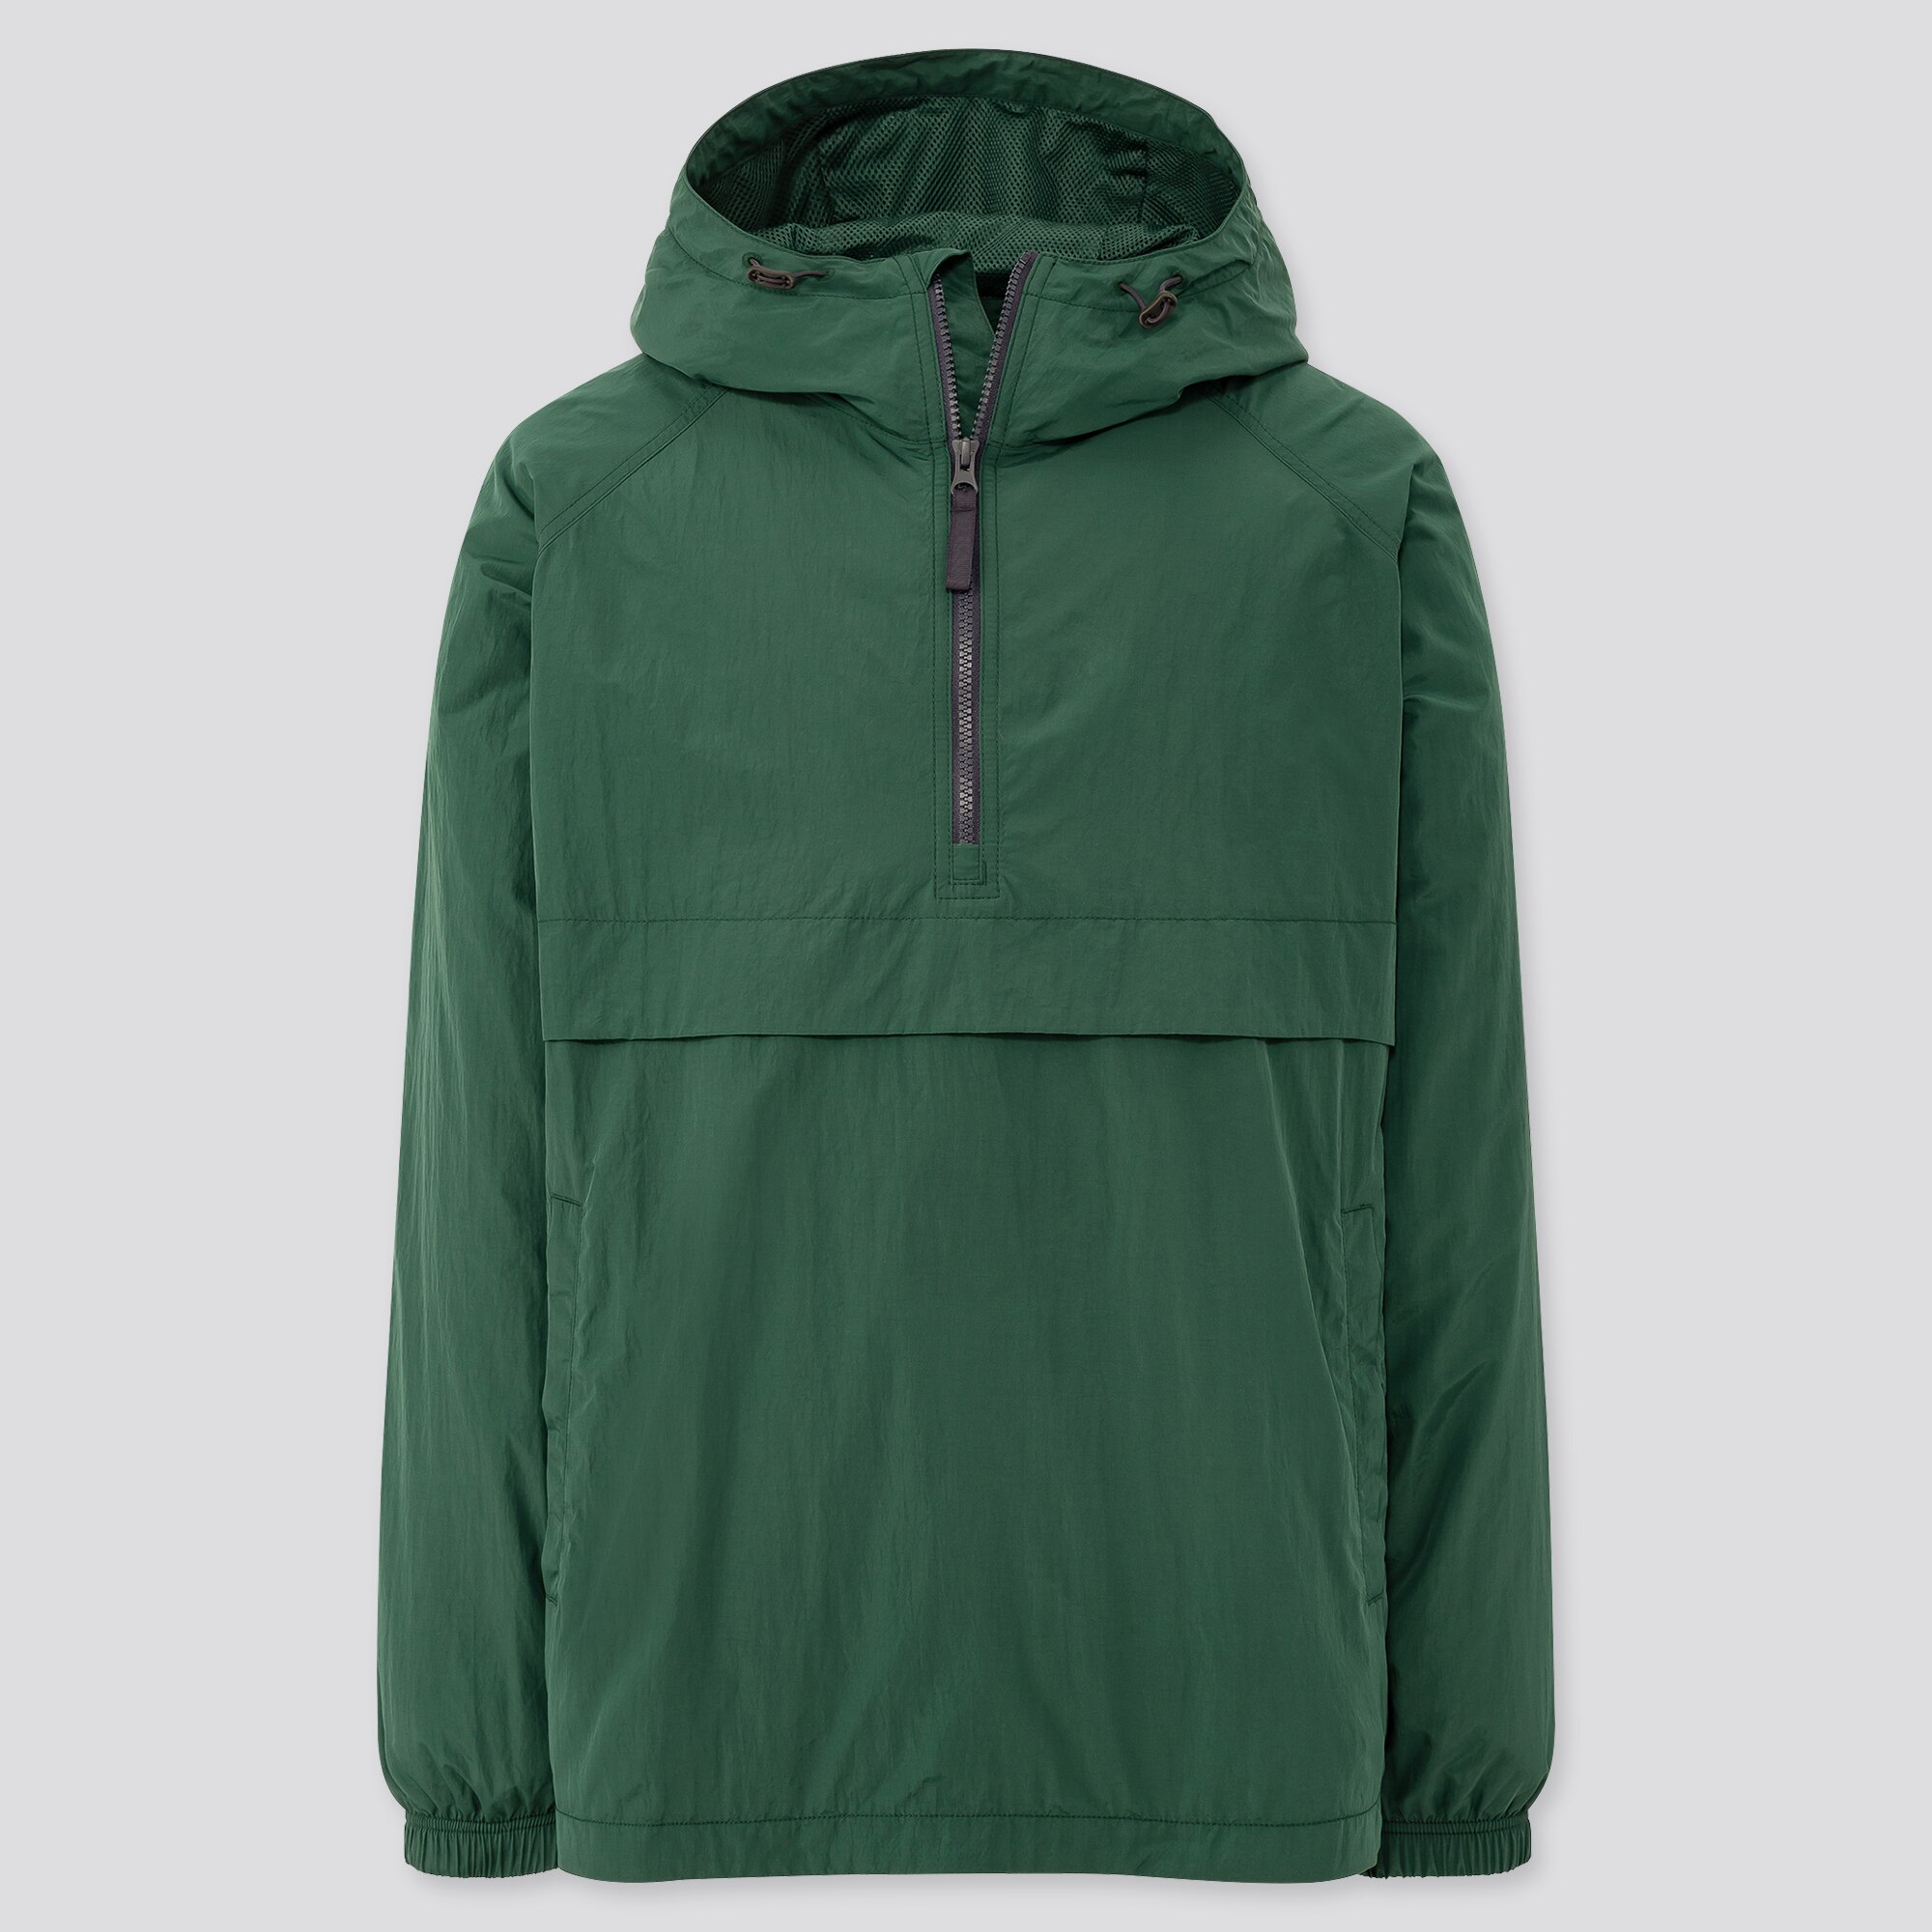 Shop Anorak UP TO 50% OFF